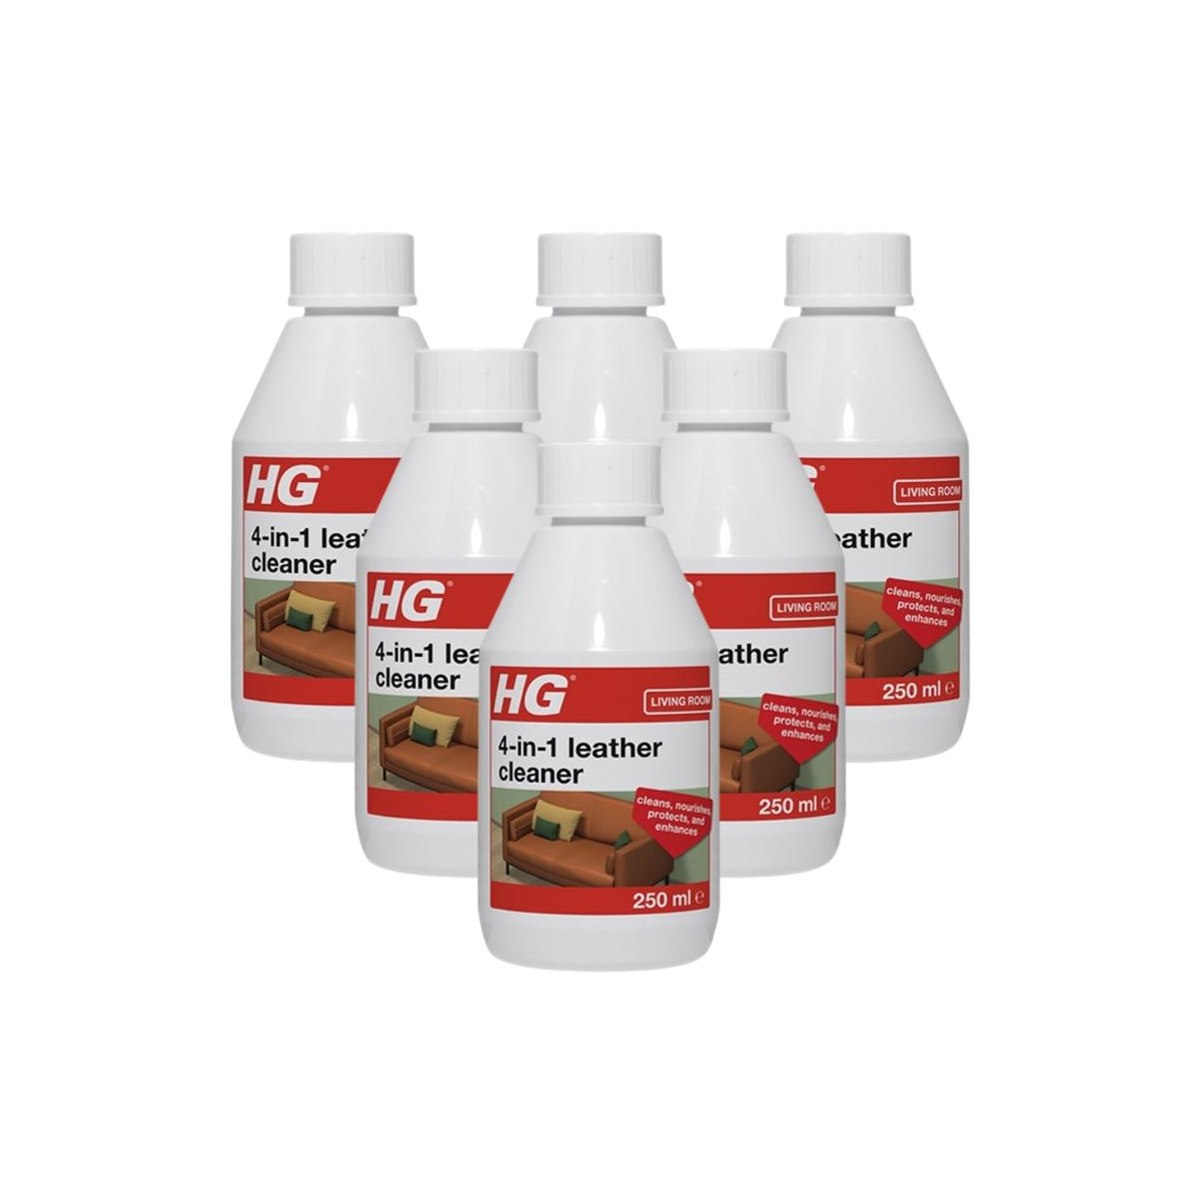 Case of 6 x HG 4 in 1 Leather Cleaner 250ml